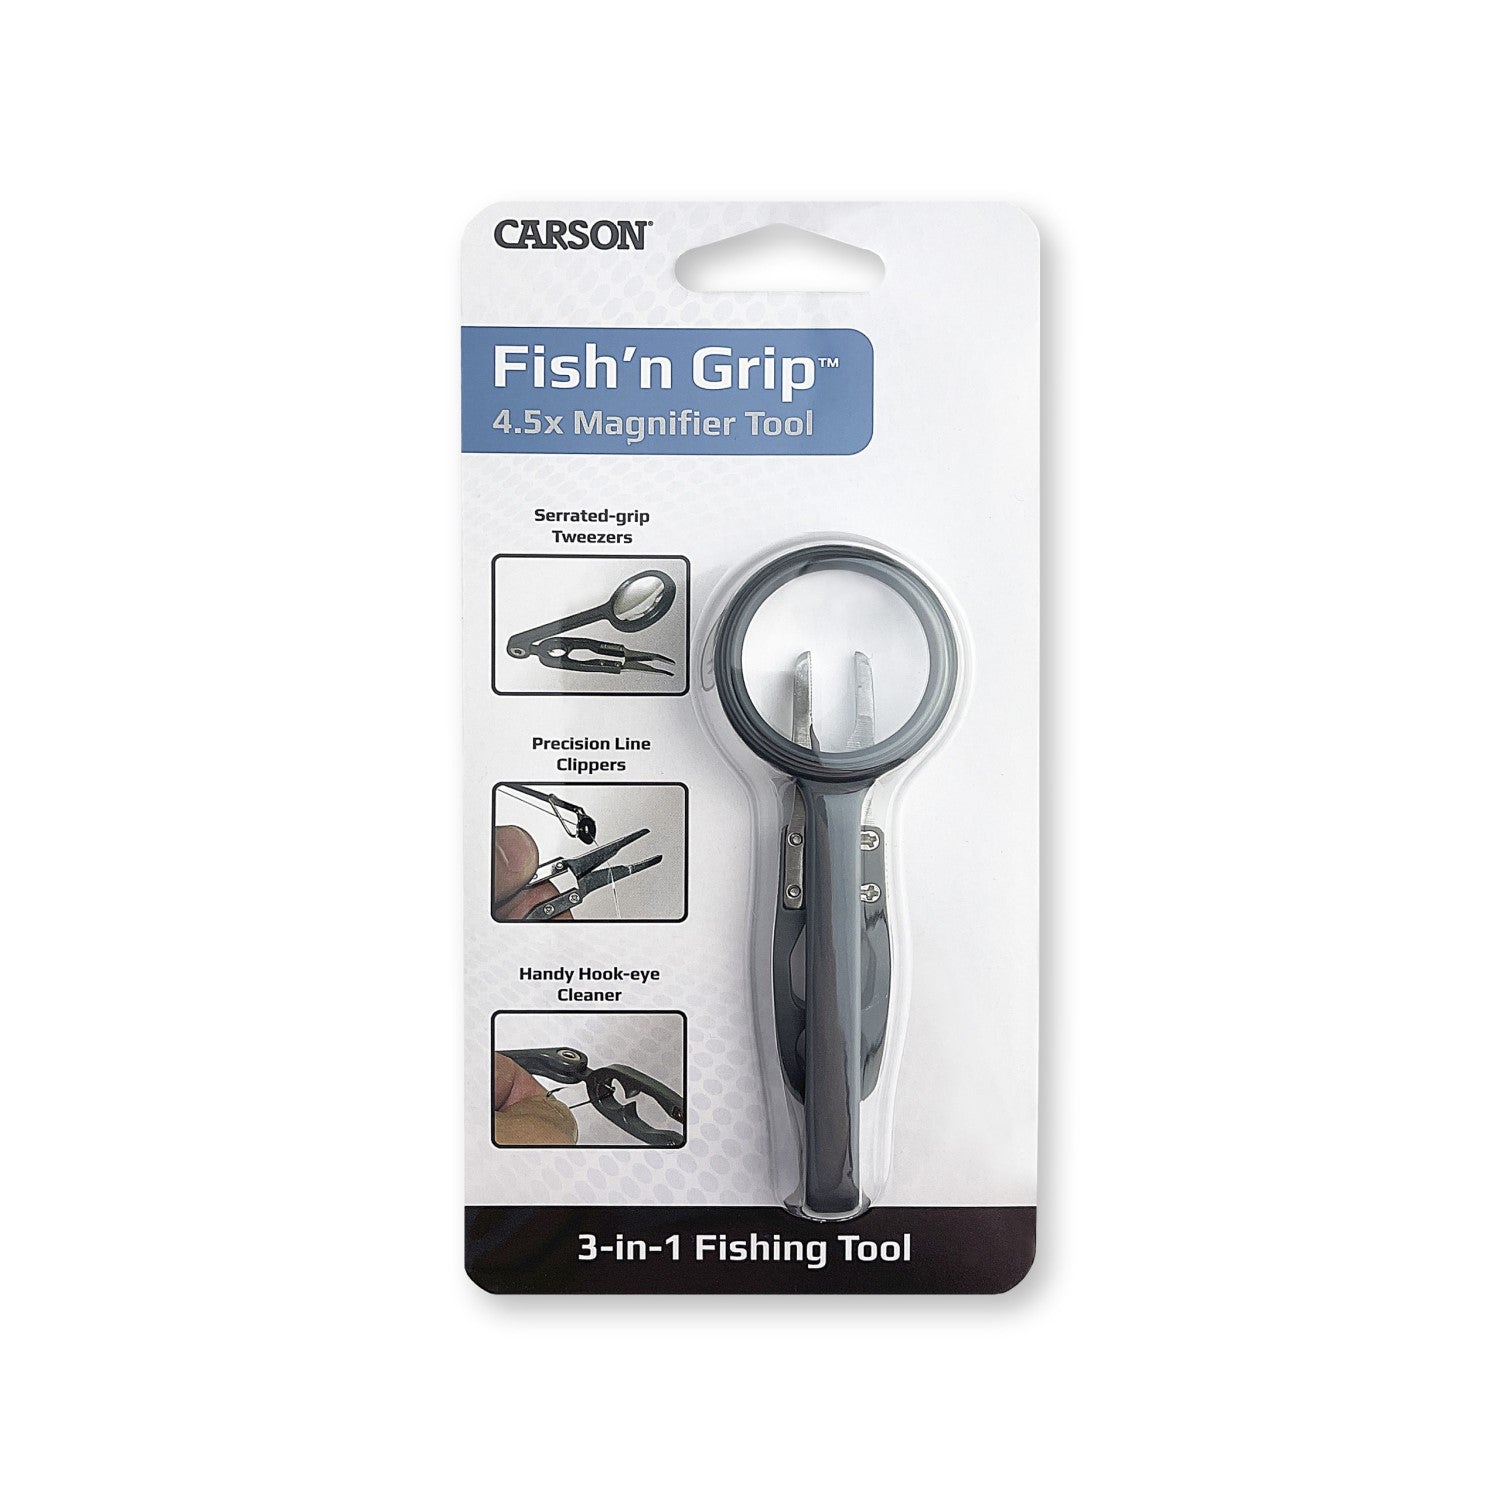 Image of the packaging that the Fish'n Grip comes in.